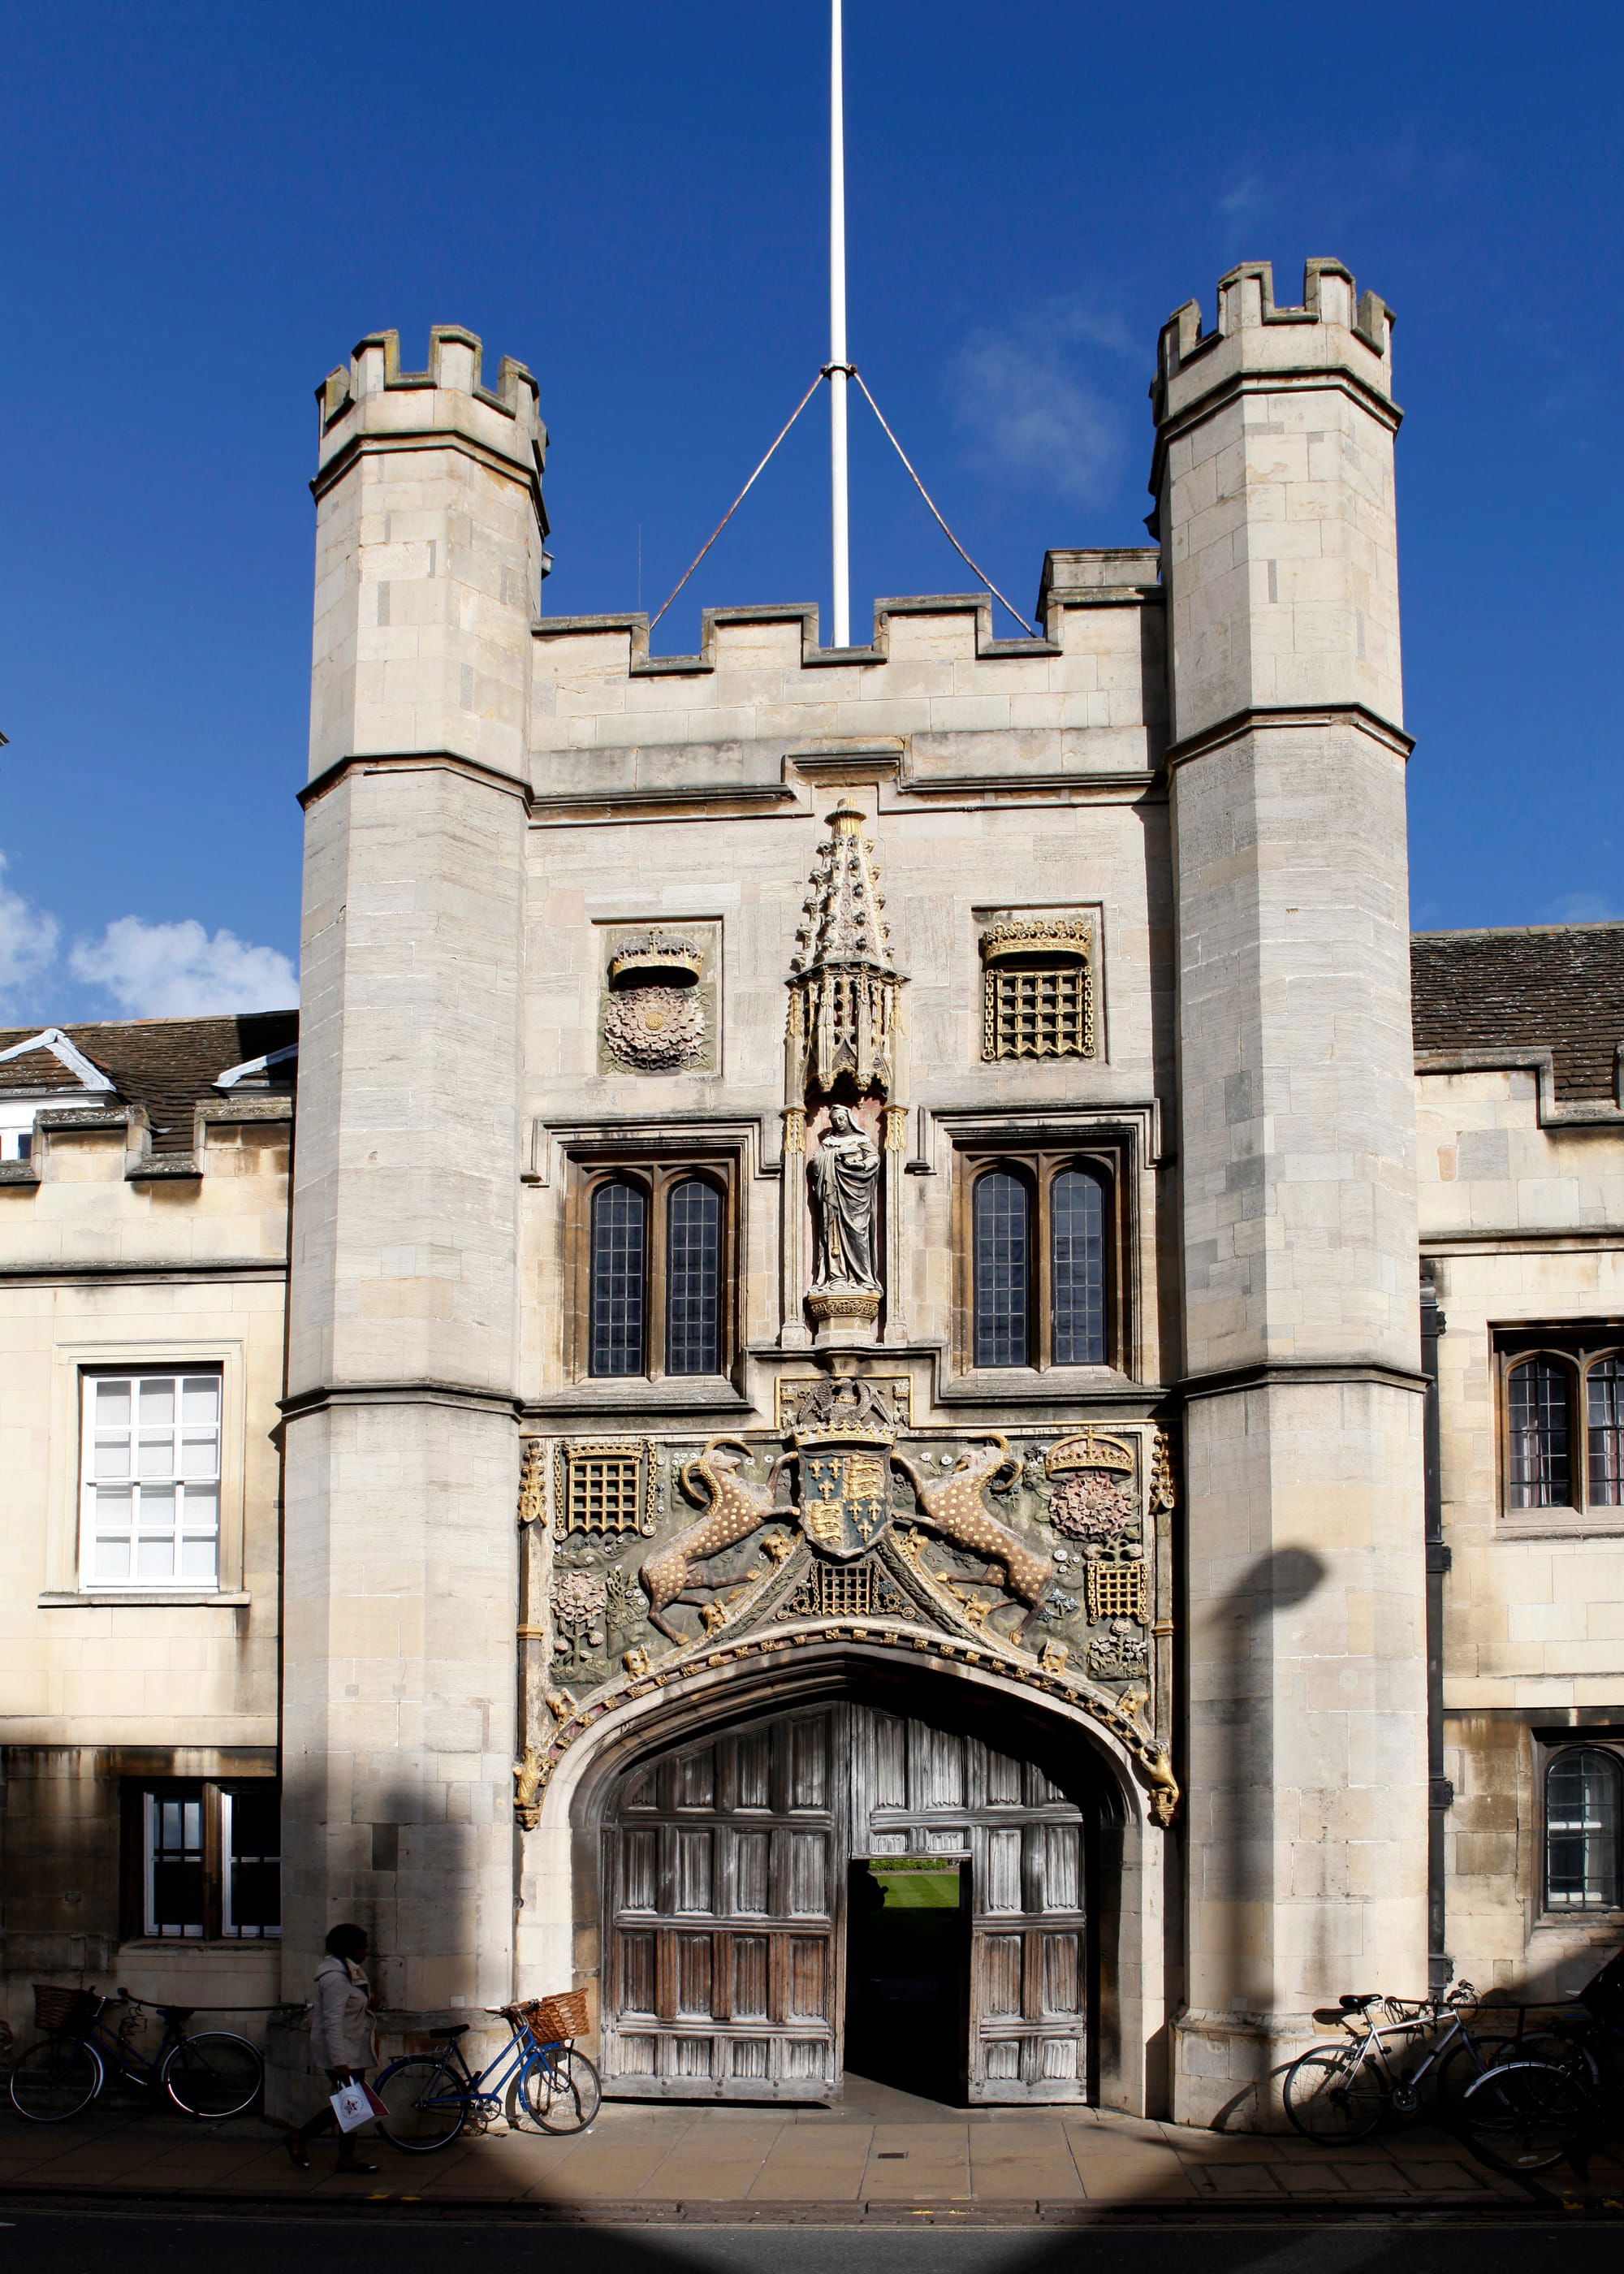 Christs College